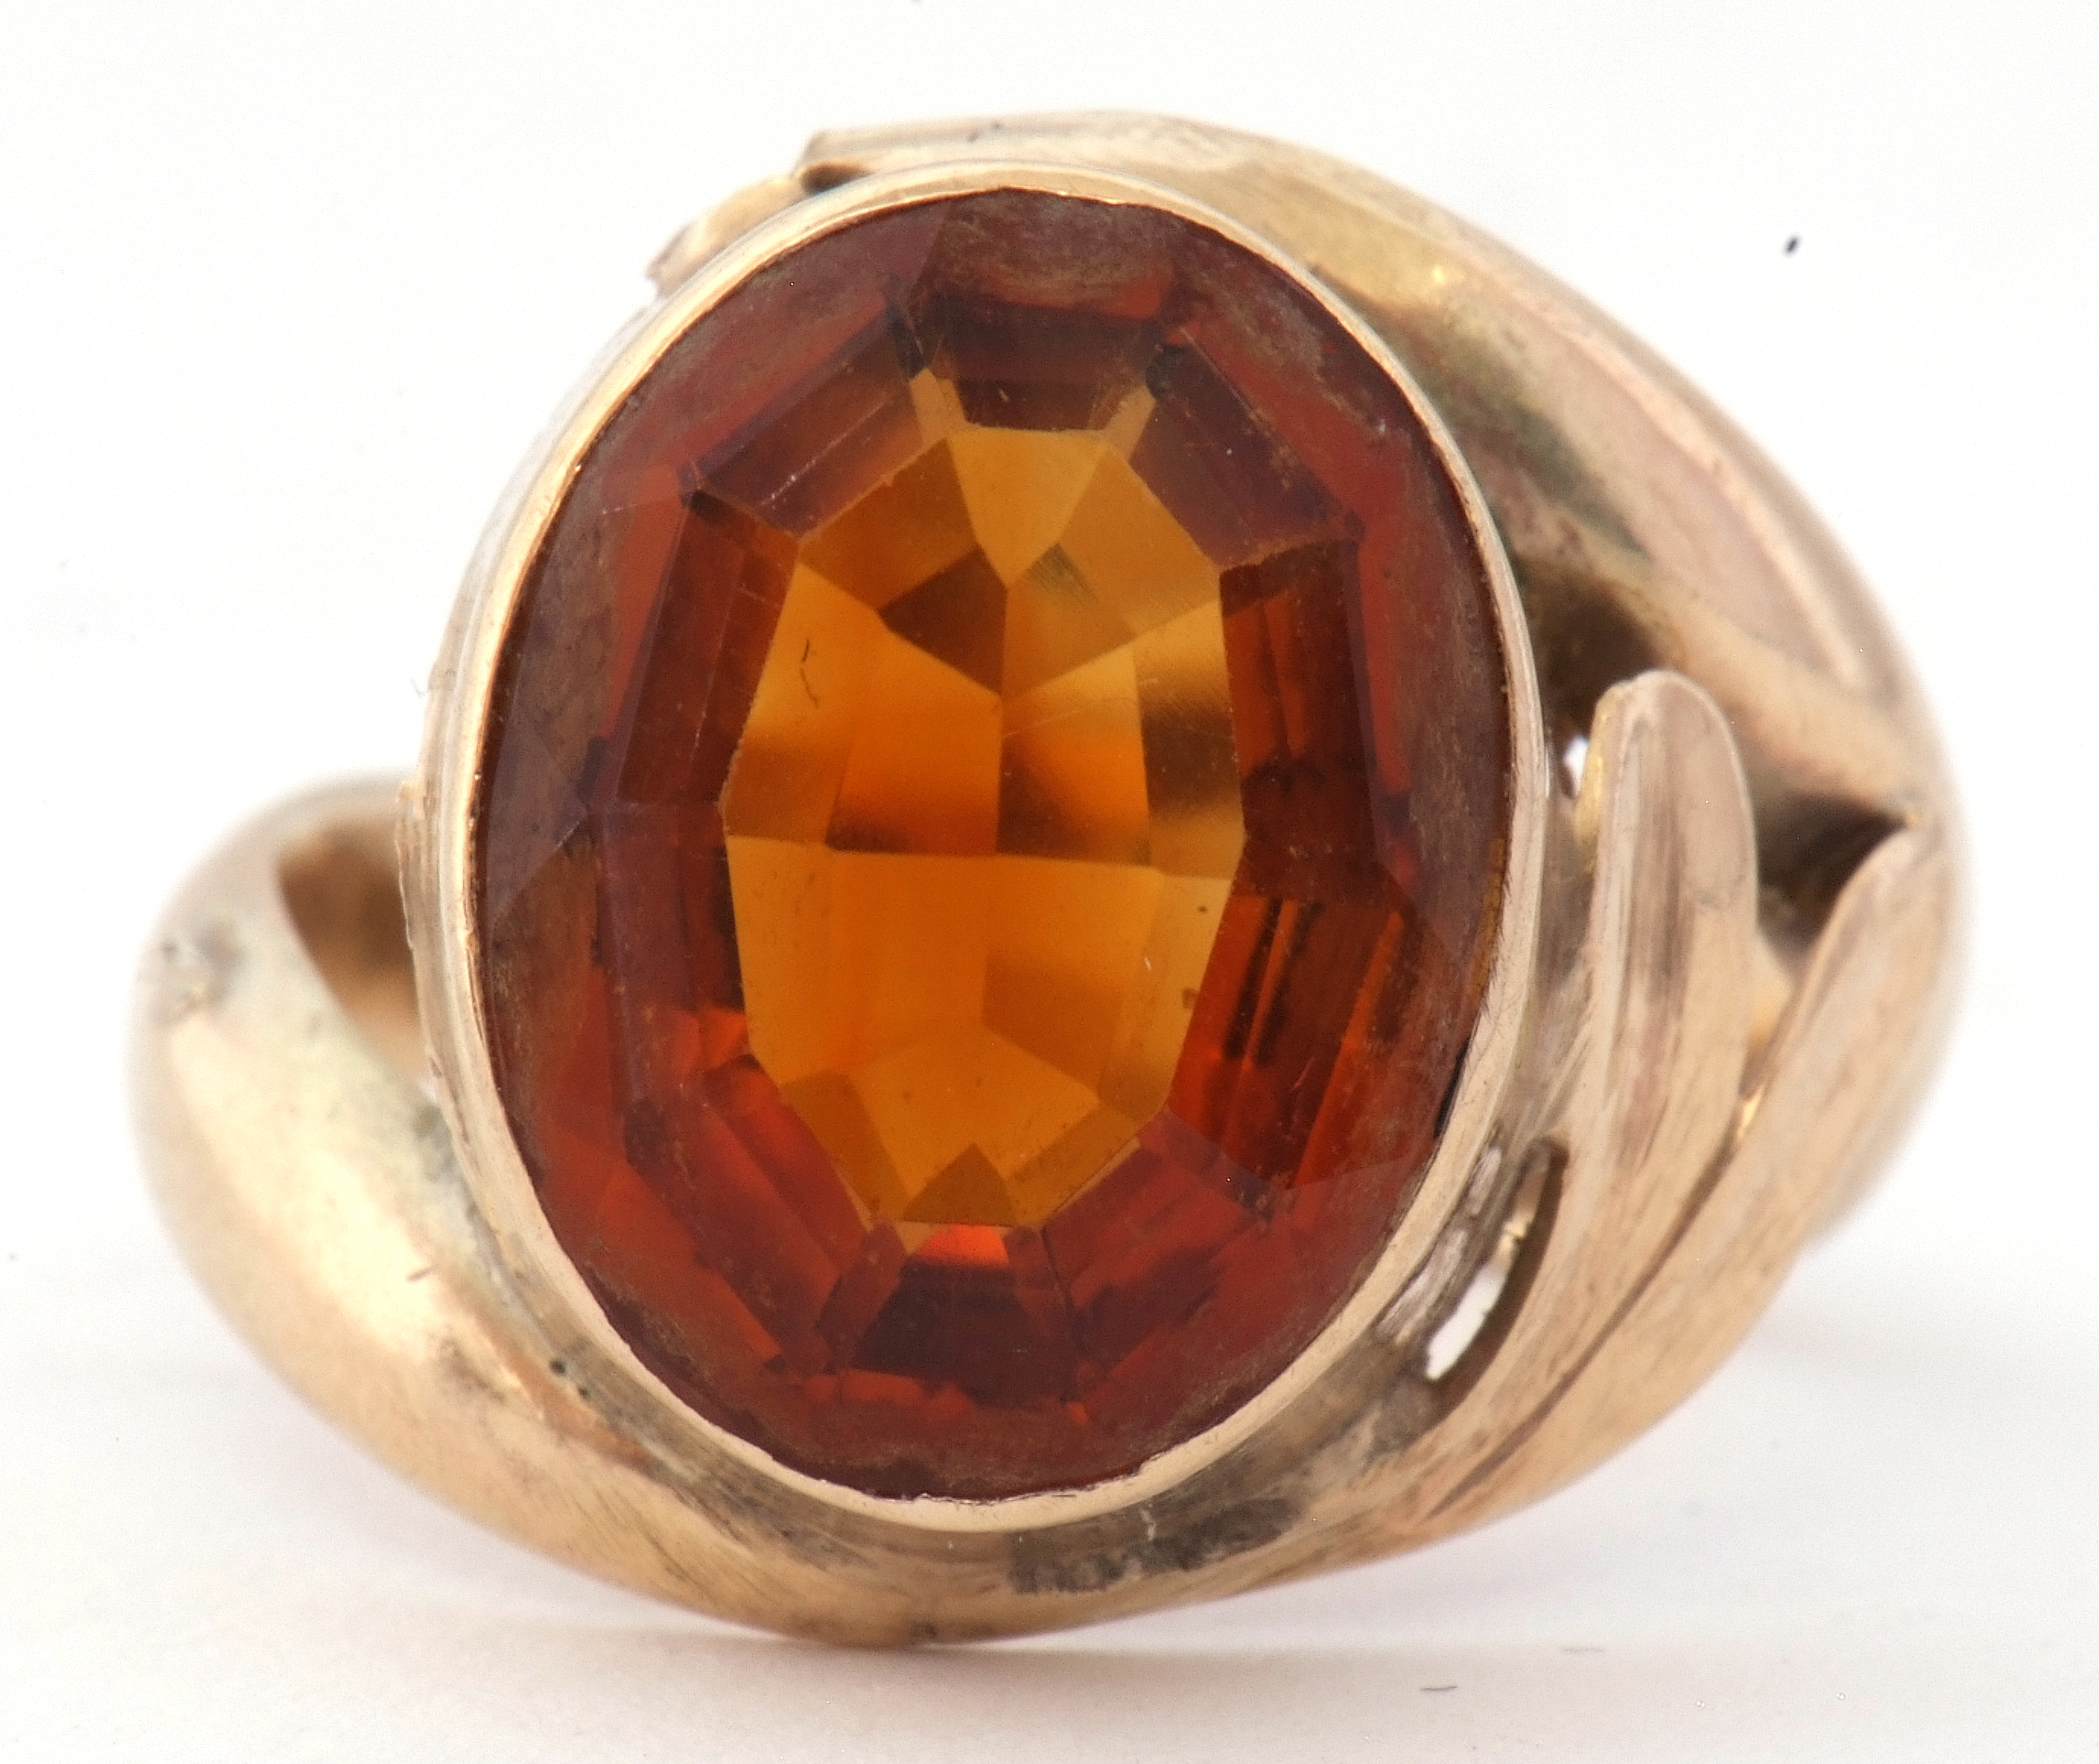 9ct stamped cognac citrine dress ring, the oval faceted citrine in a rub-over setting raised between